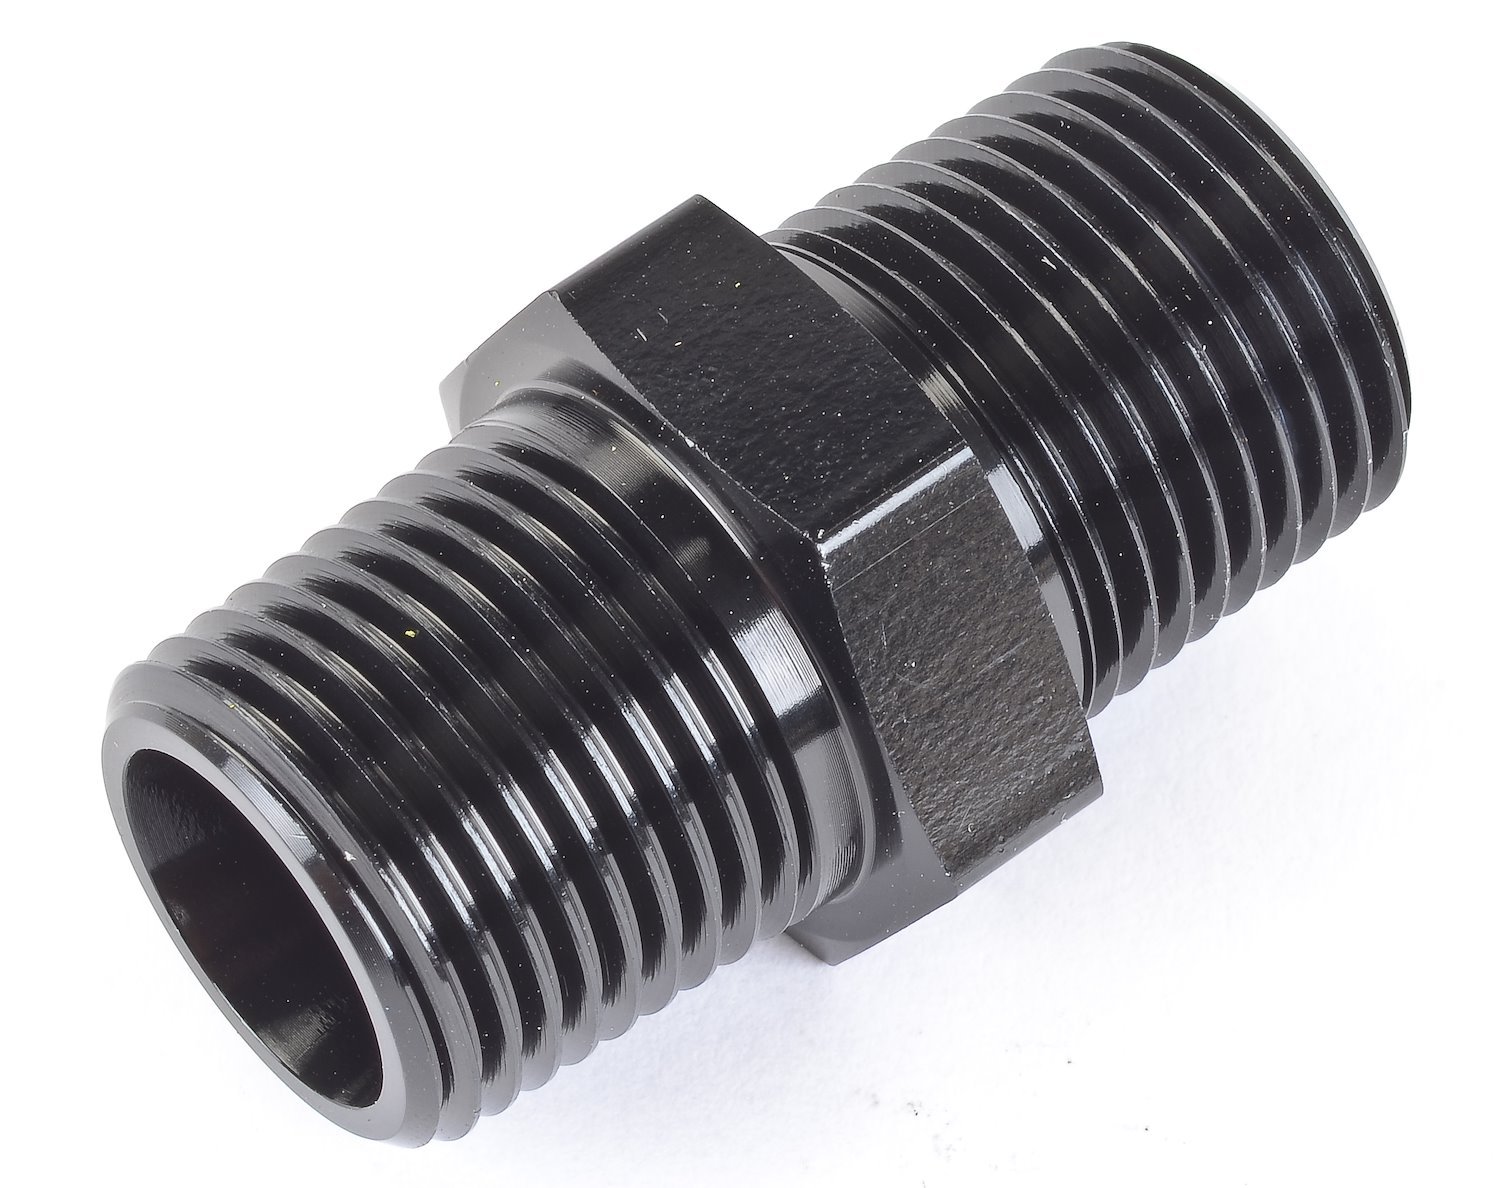 NPT to NPT Straight Union Fitting [3/8 in. NPT Male to 3/8 in. NPT Male, Black]